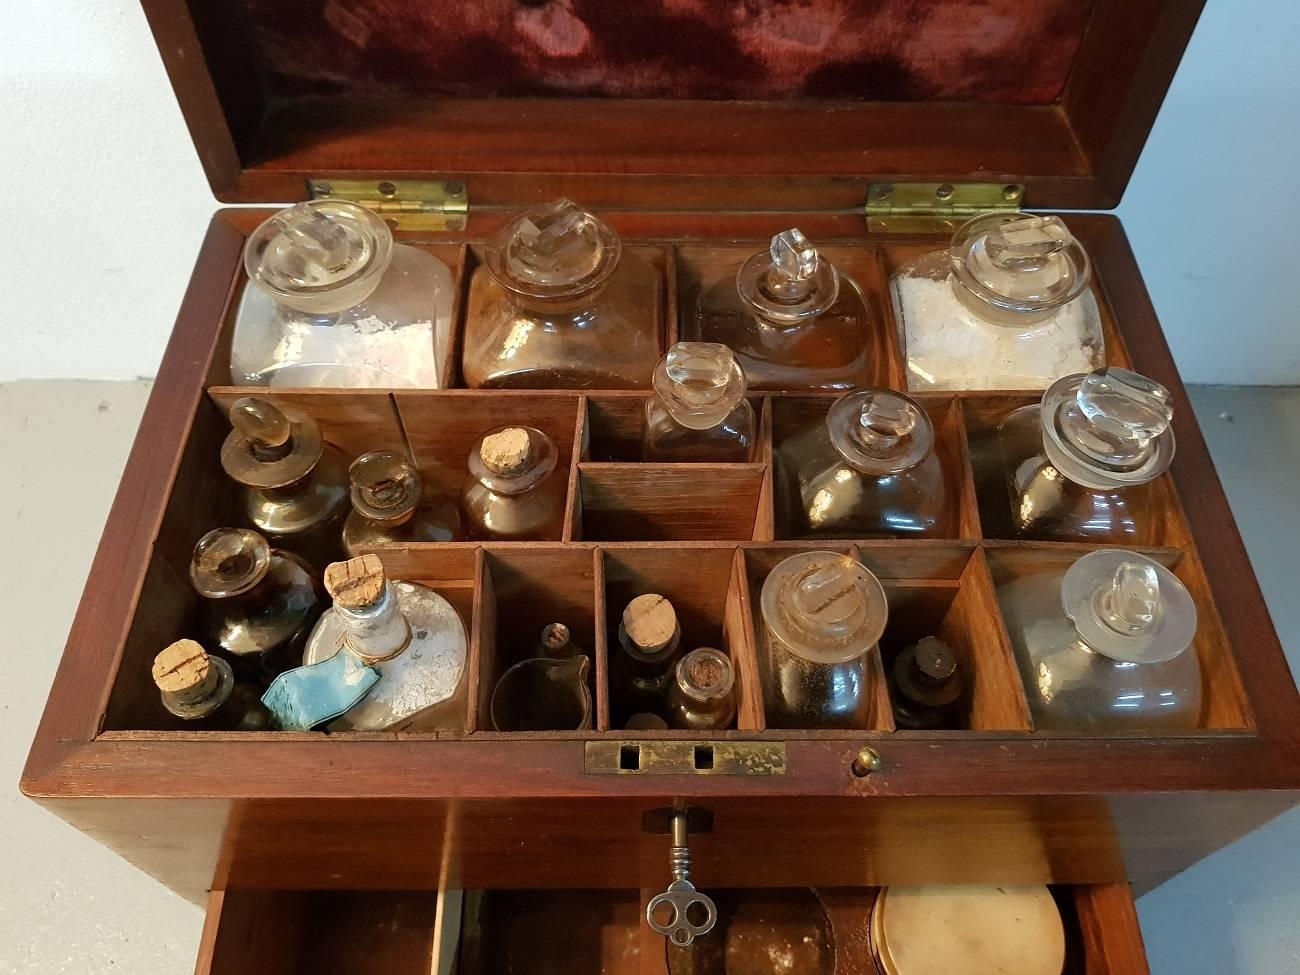 Antique late 19th century English mahogany doctors or apothecary travel box or cabinet with various bottles and attributes including mortar with pestle old heat plaster with beautiful illustrations etc.

The measurements are,
Depth 23.5 cm/ 9.2